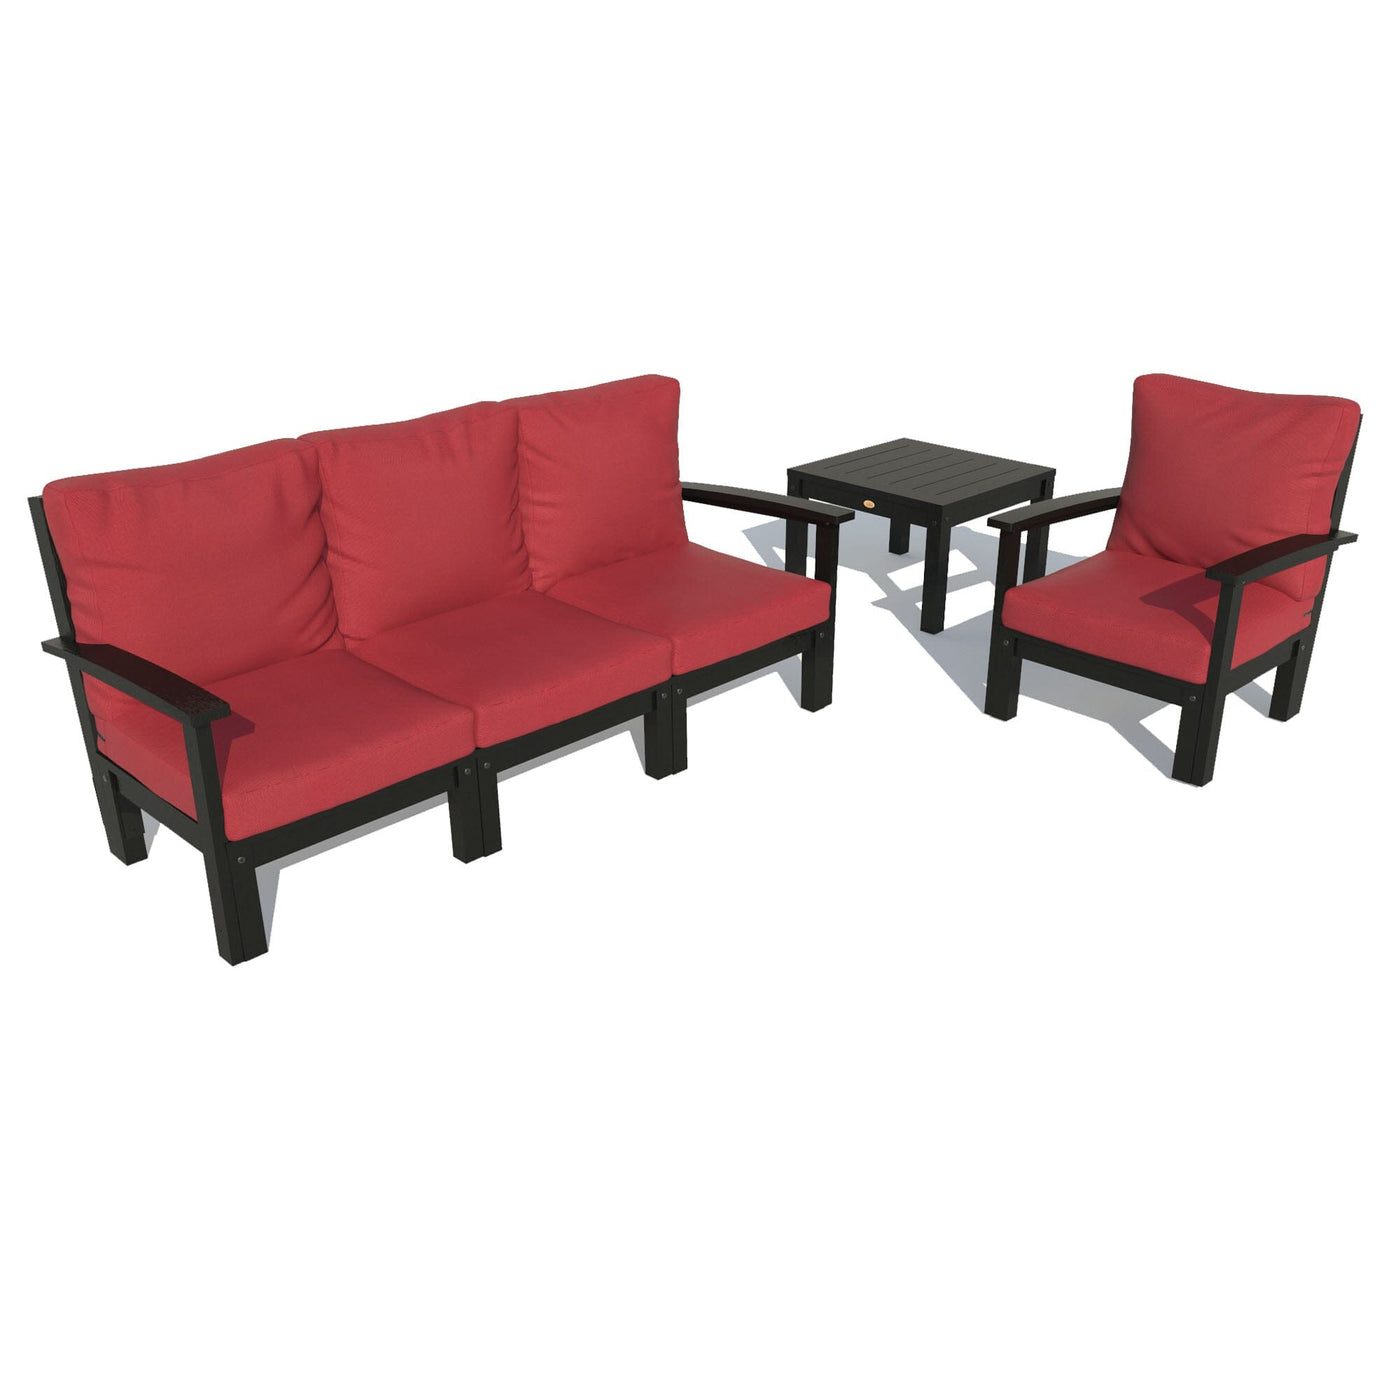 Bespoke Deep Seating: Sofa, Chair, and Side Table Deep Seating Highwood USA Firecracker Red Black 